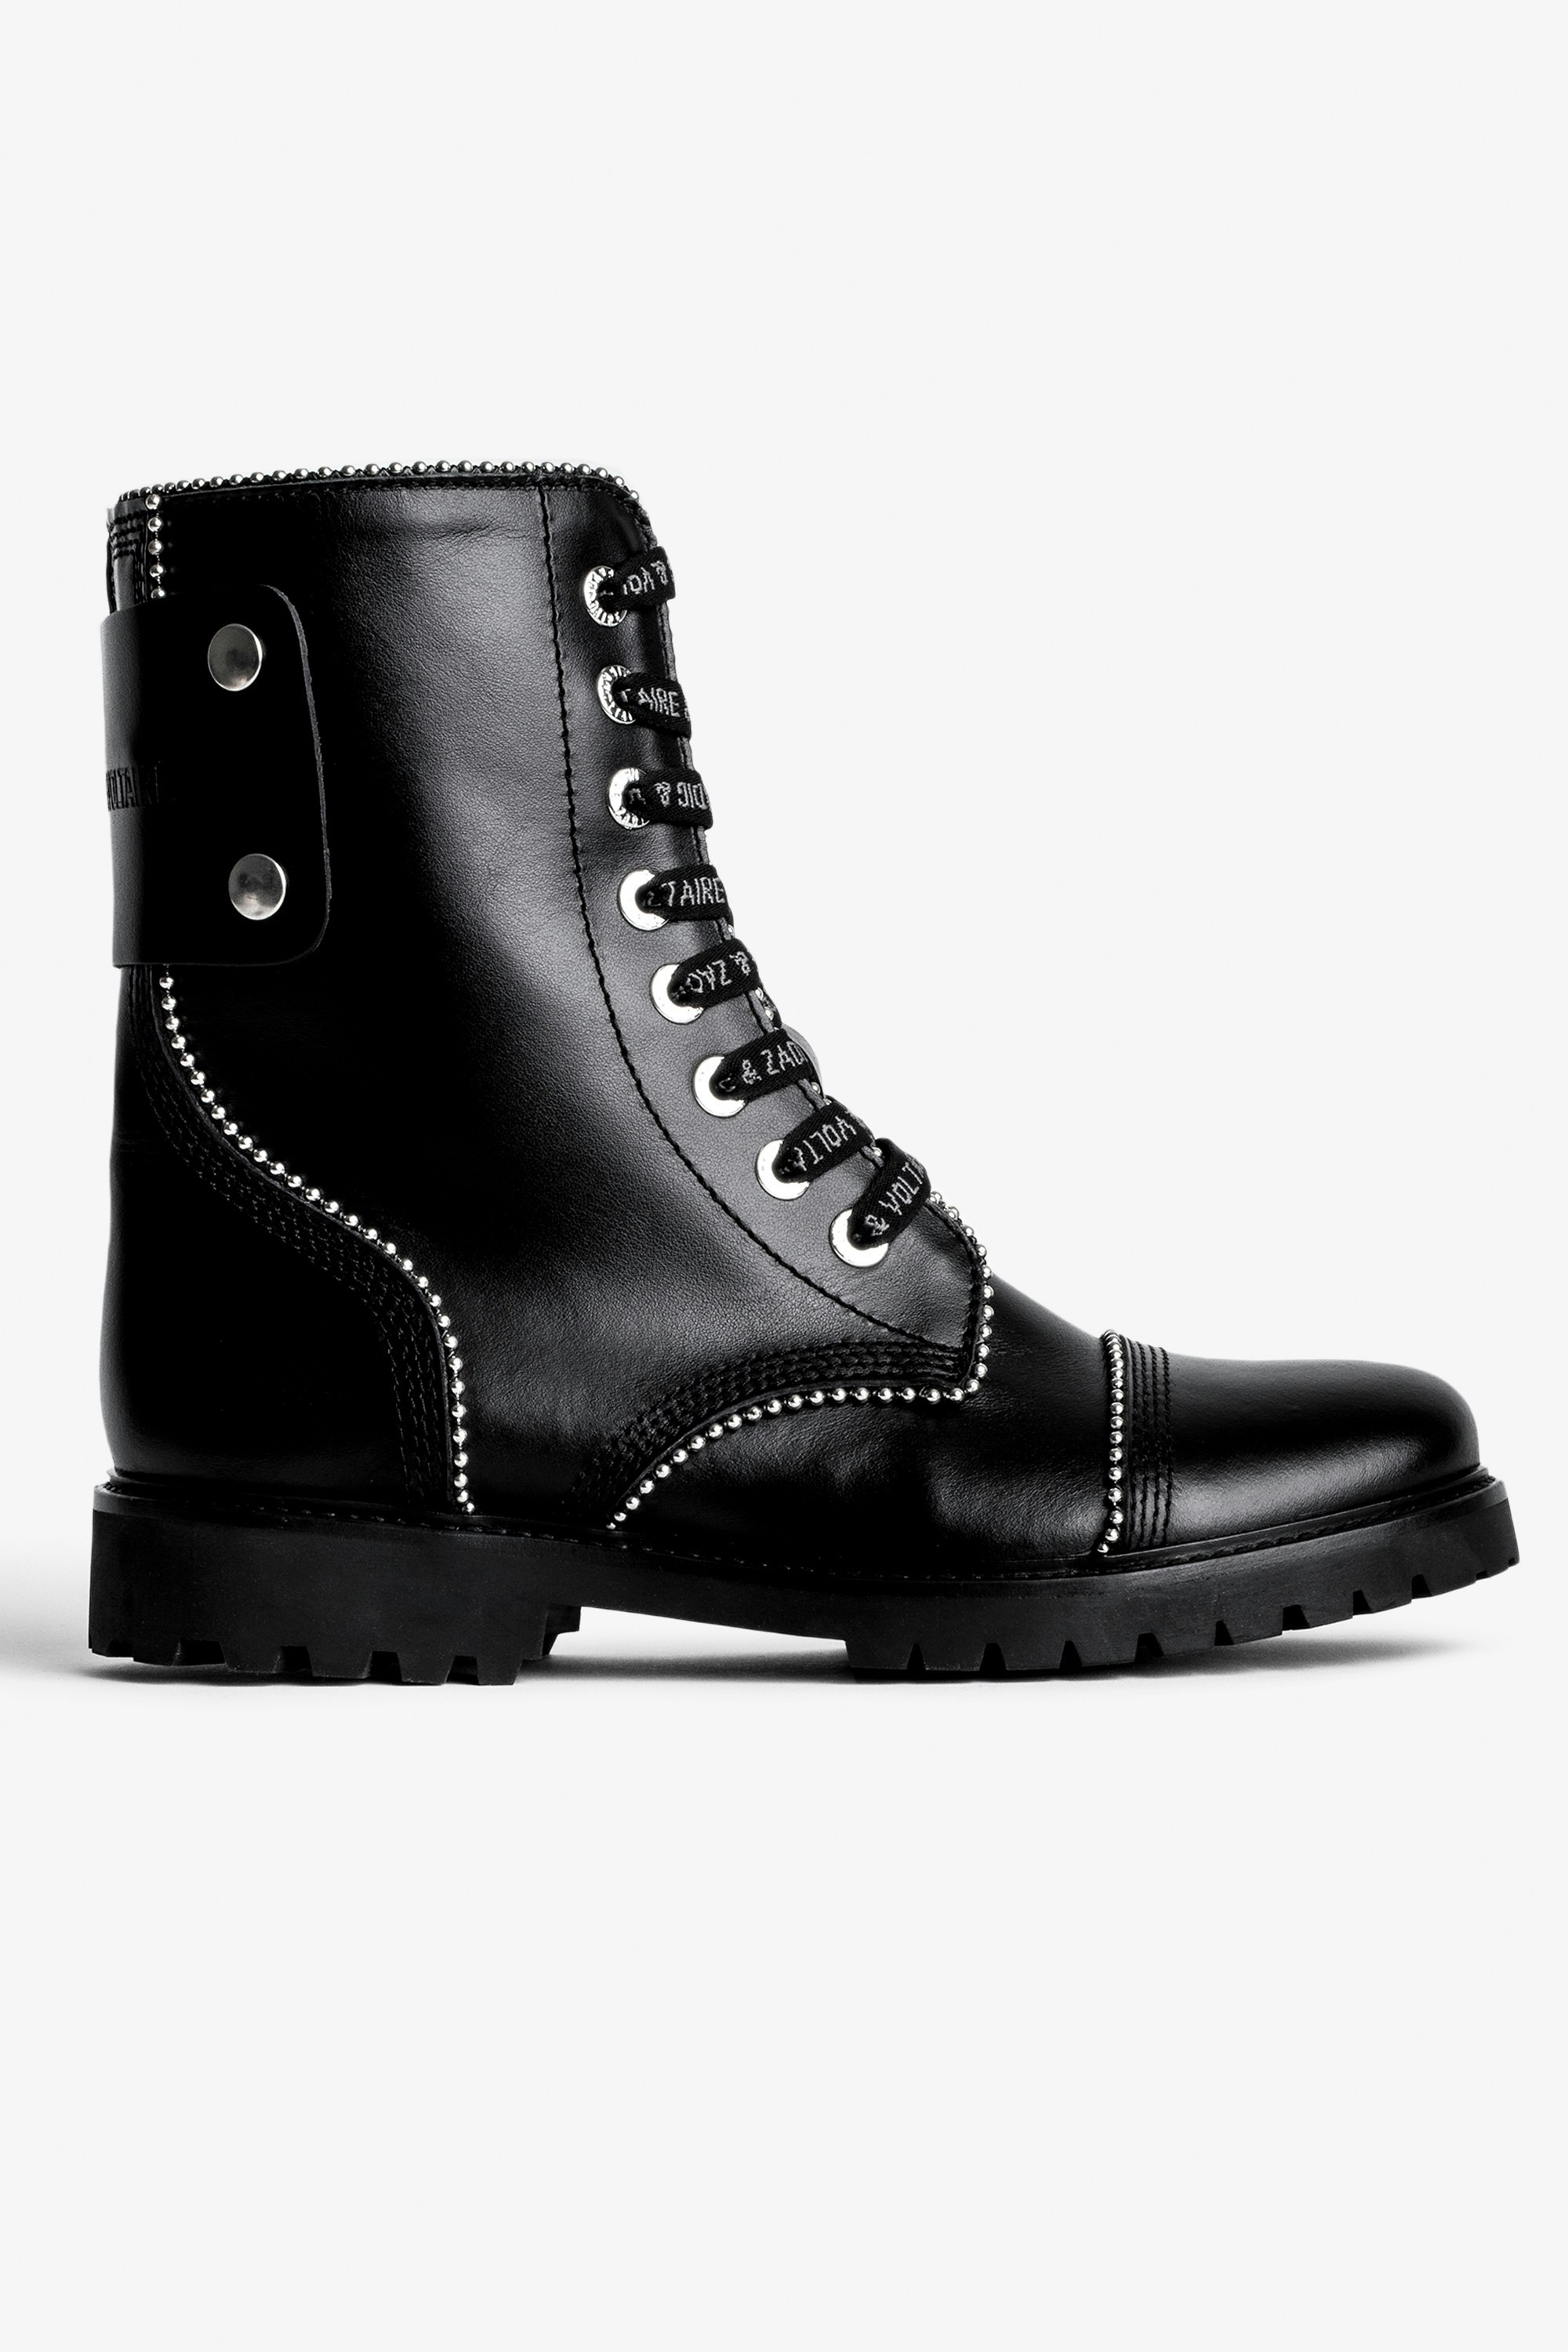 Joe Ankle Boots - Women's studded smooth black leather combat boots